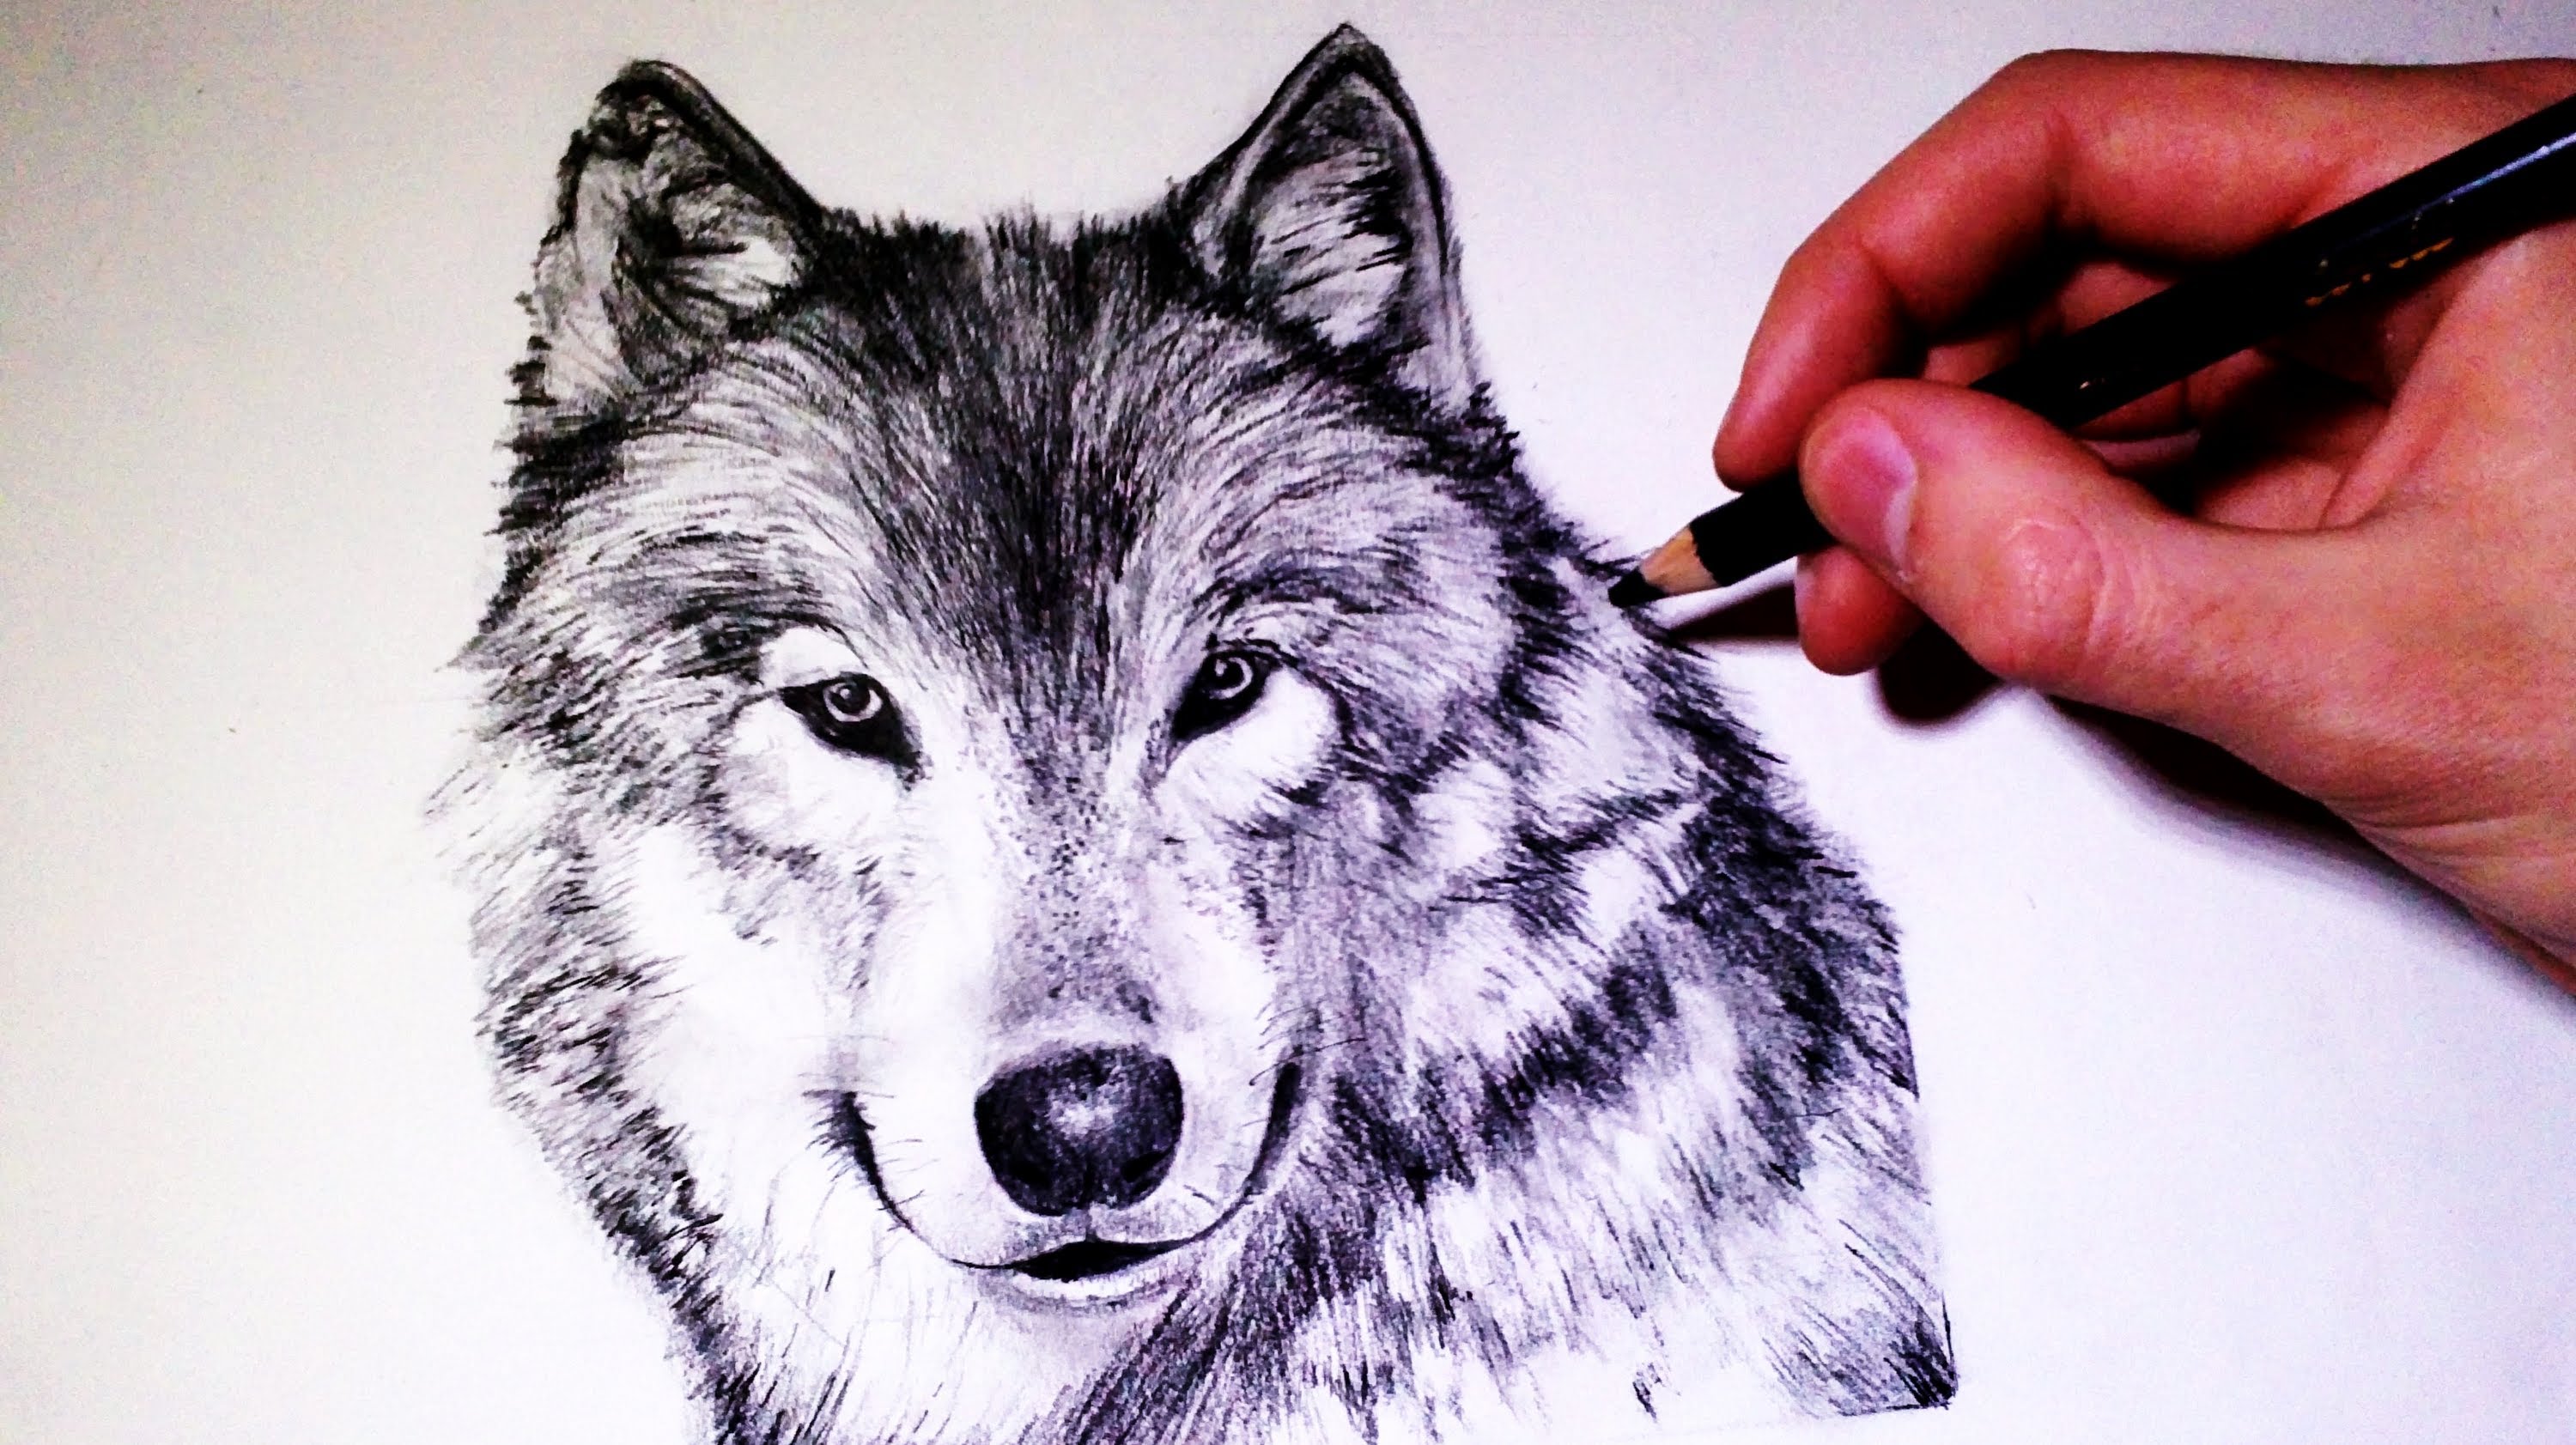 New How To Draw A Realistic Hard Wolf Full Video Sketch with simple drawing